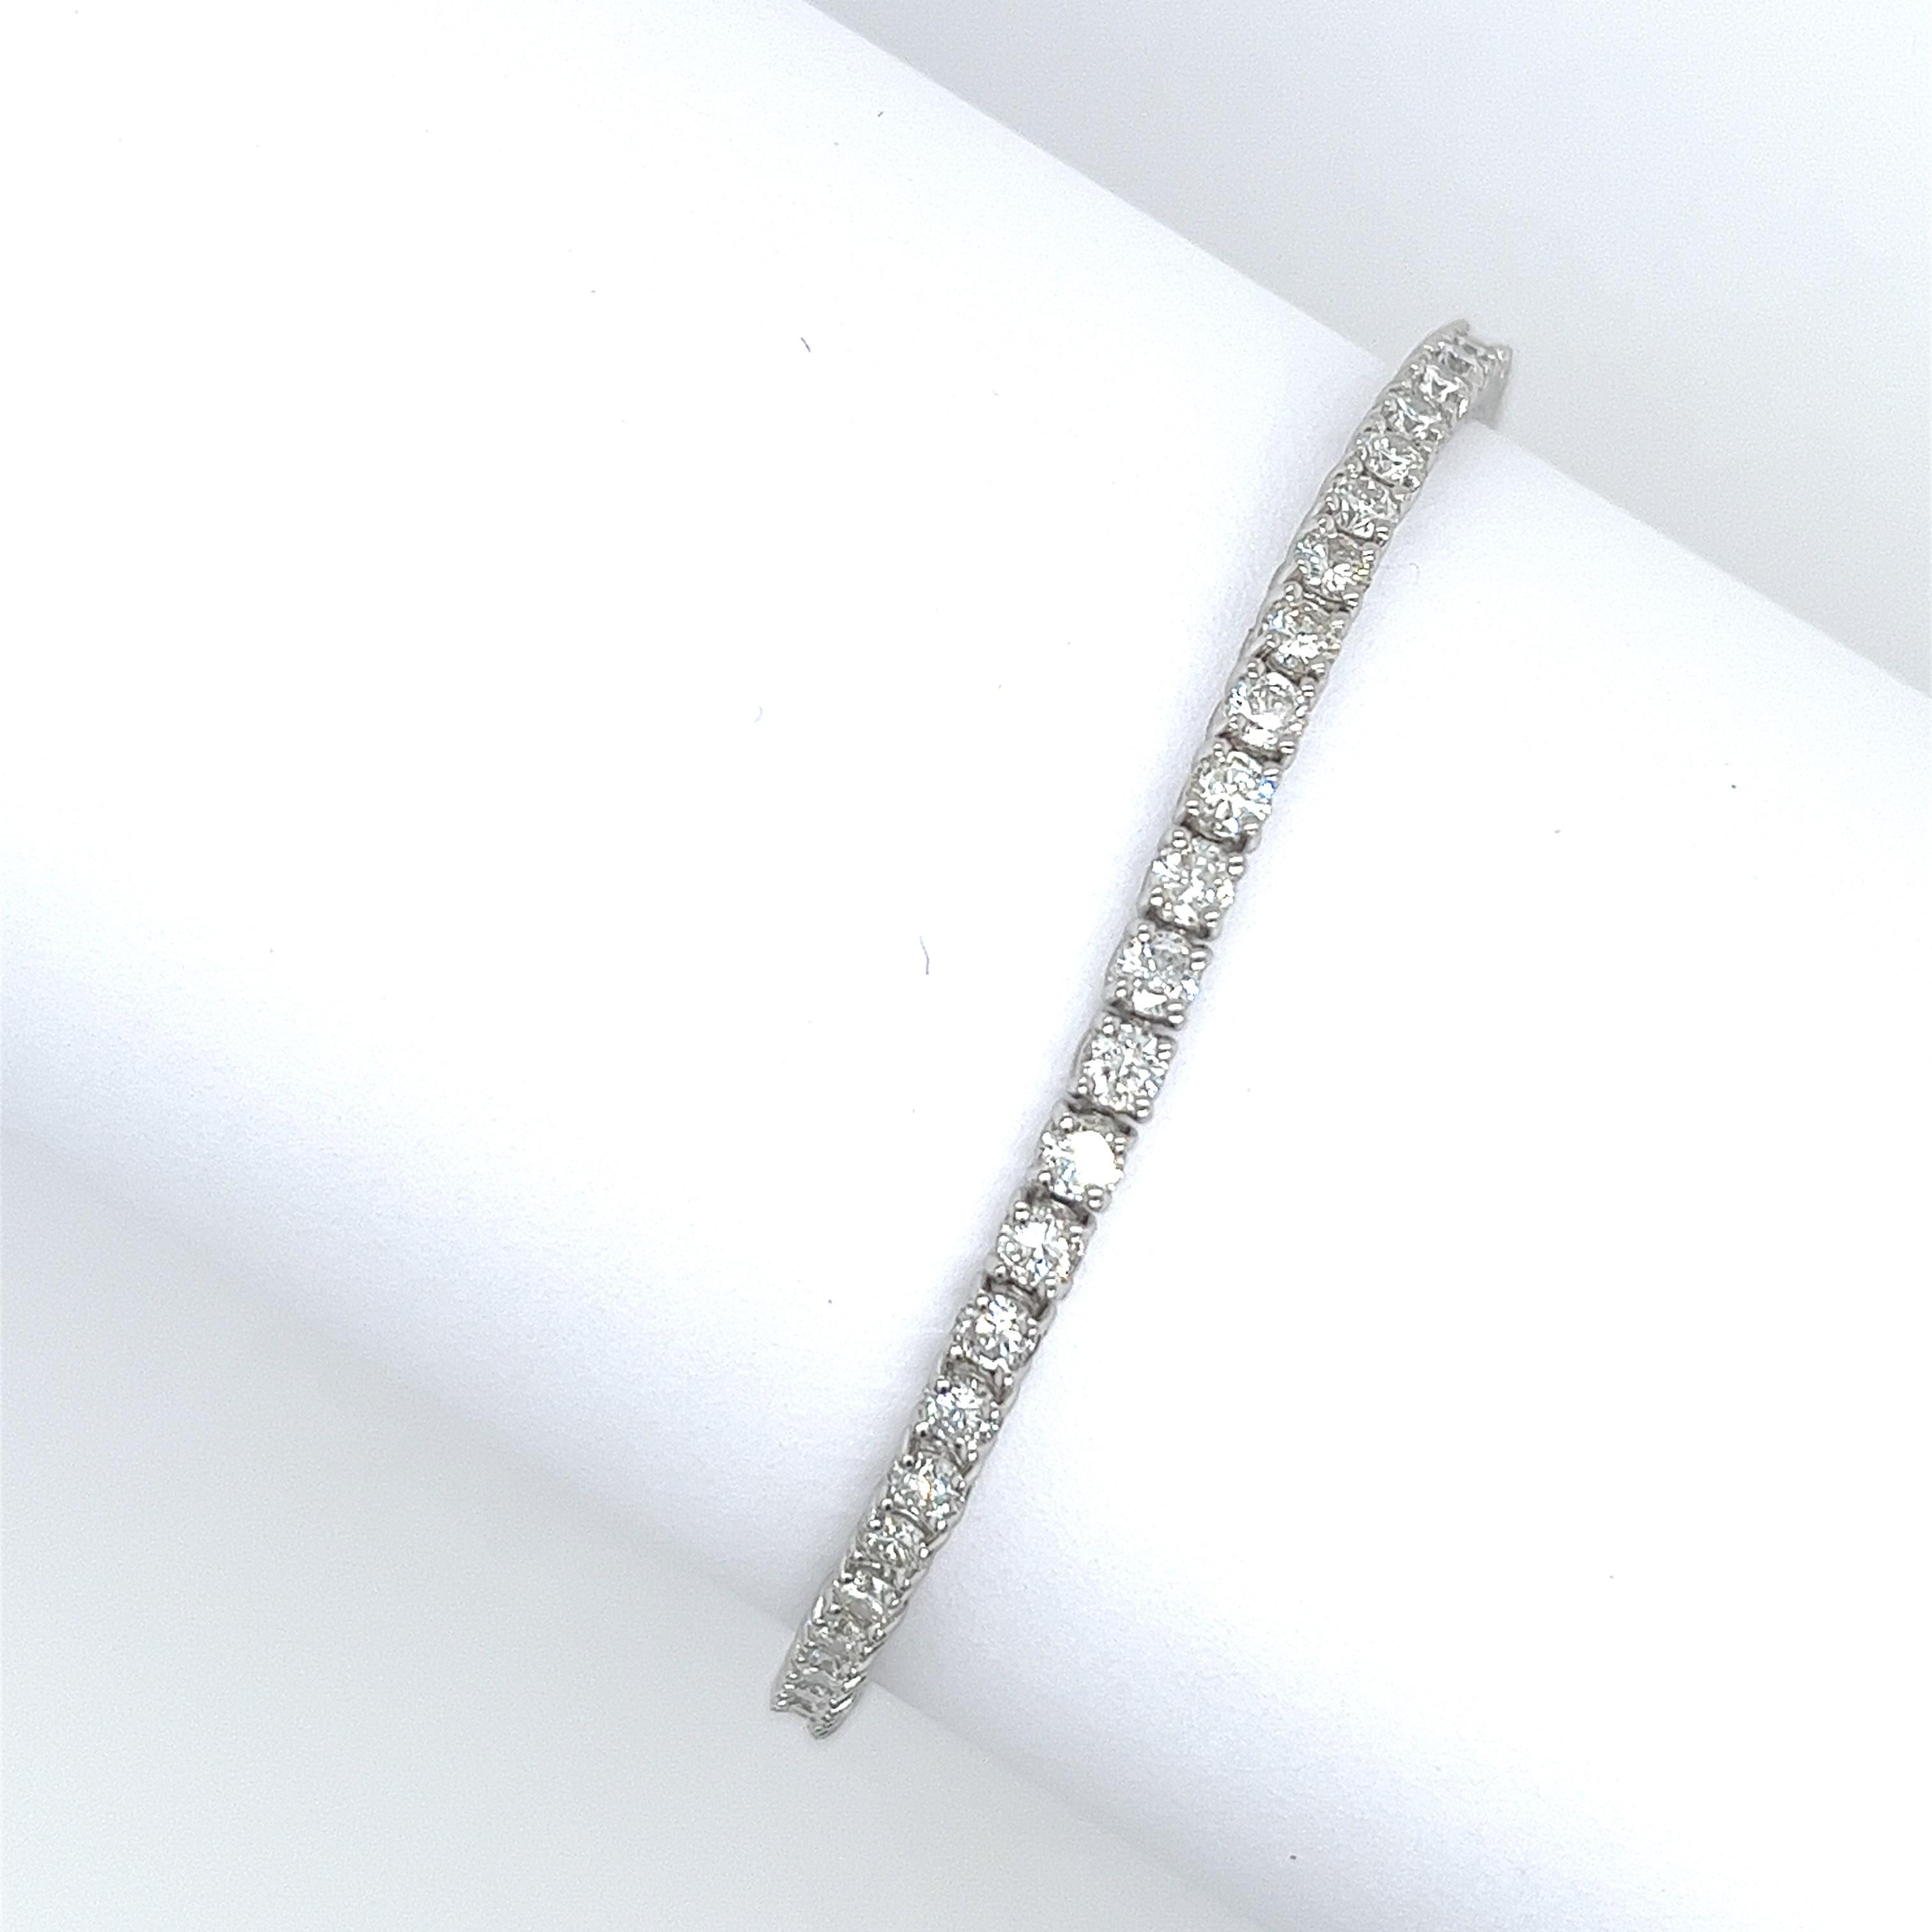 A beautiful diamond tennis bracelet in 18ct white gold, 

features a total diamond weight of 4.50ct natural round brilliant cut diamonds VS1 clarity H colour.

This is a fantastic piece of jewellery that will last a lifetime 

and can be worn